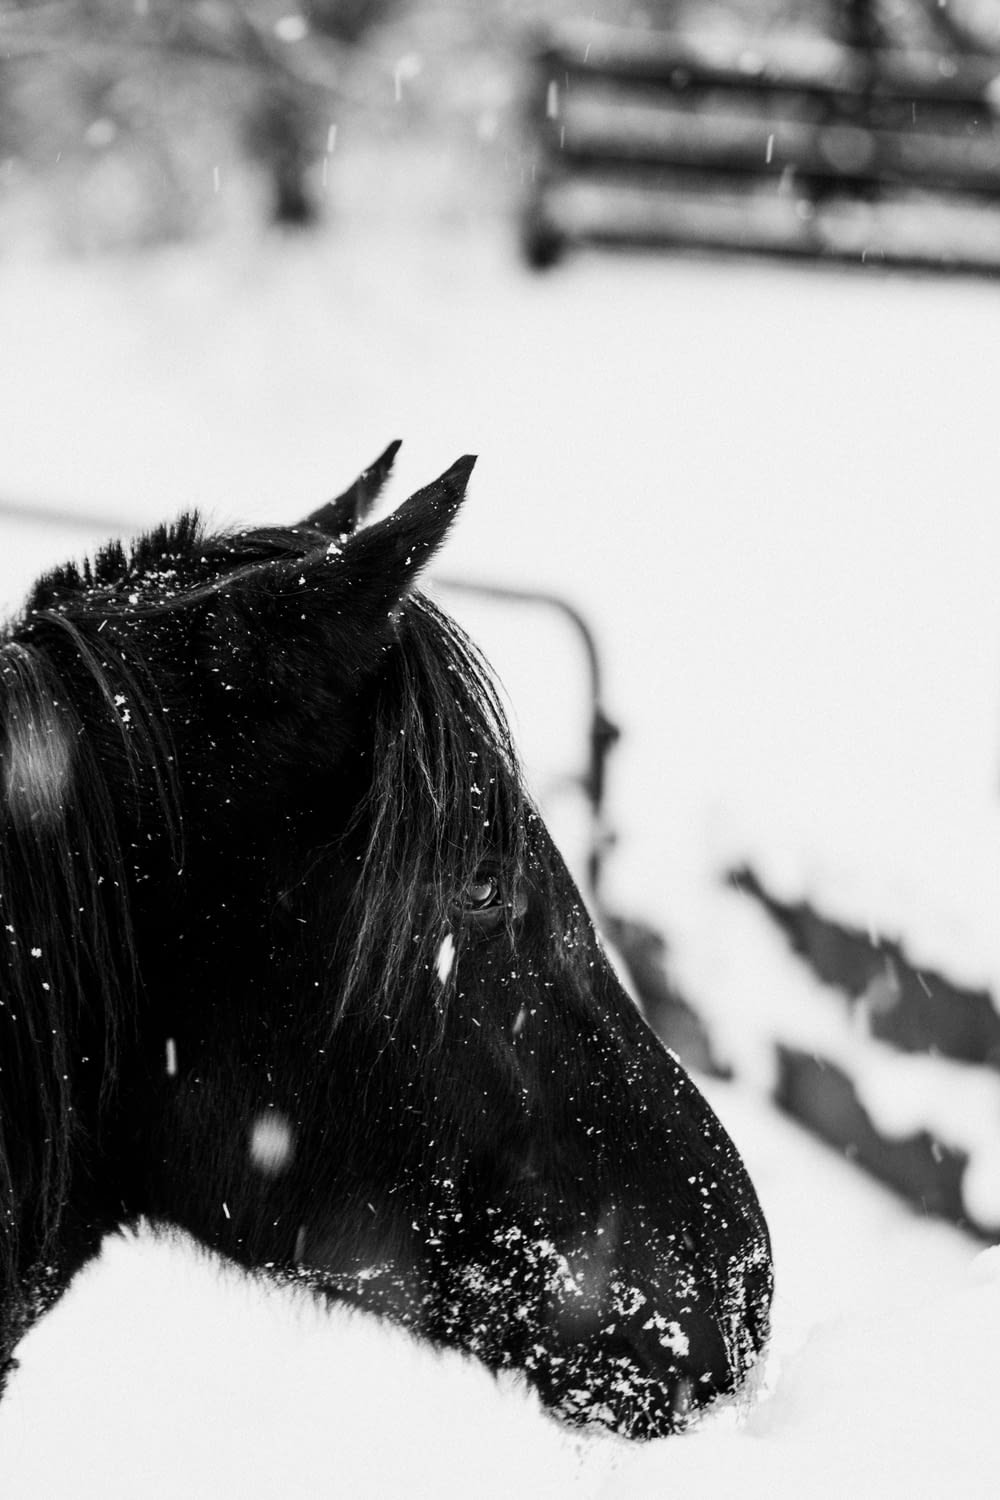 black horse on snow covered ground